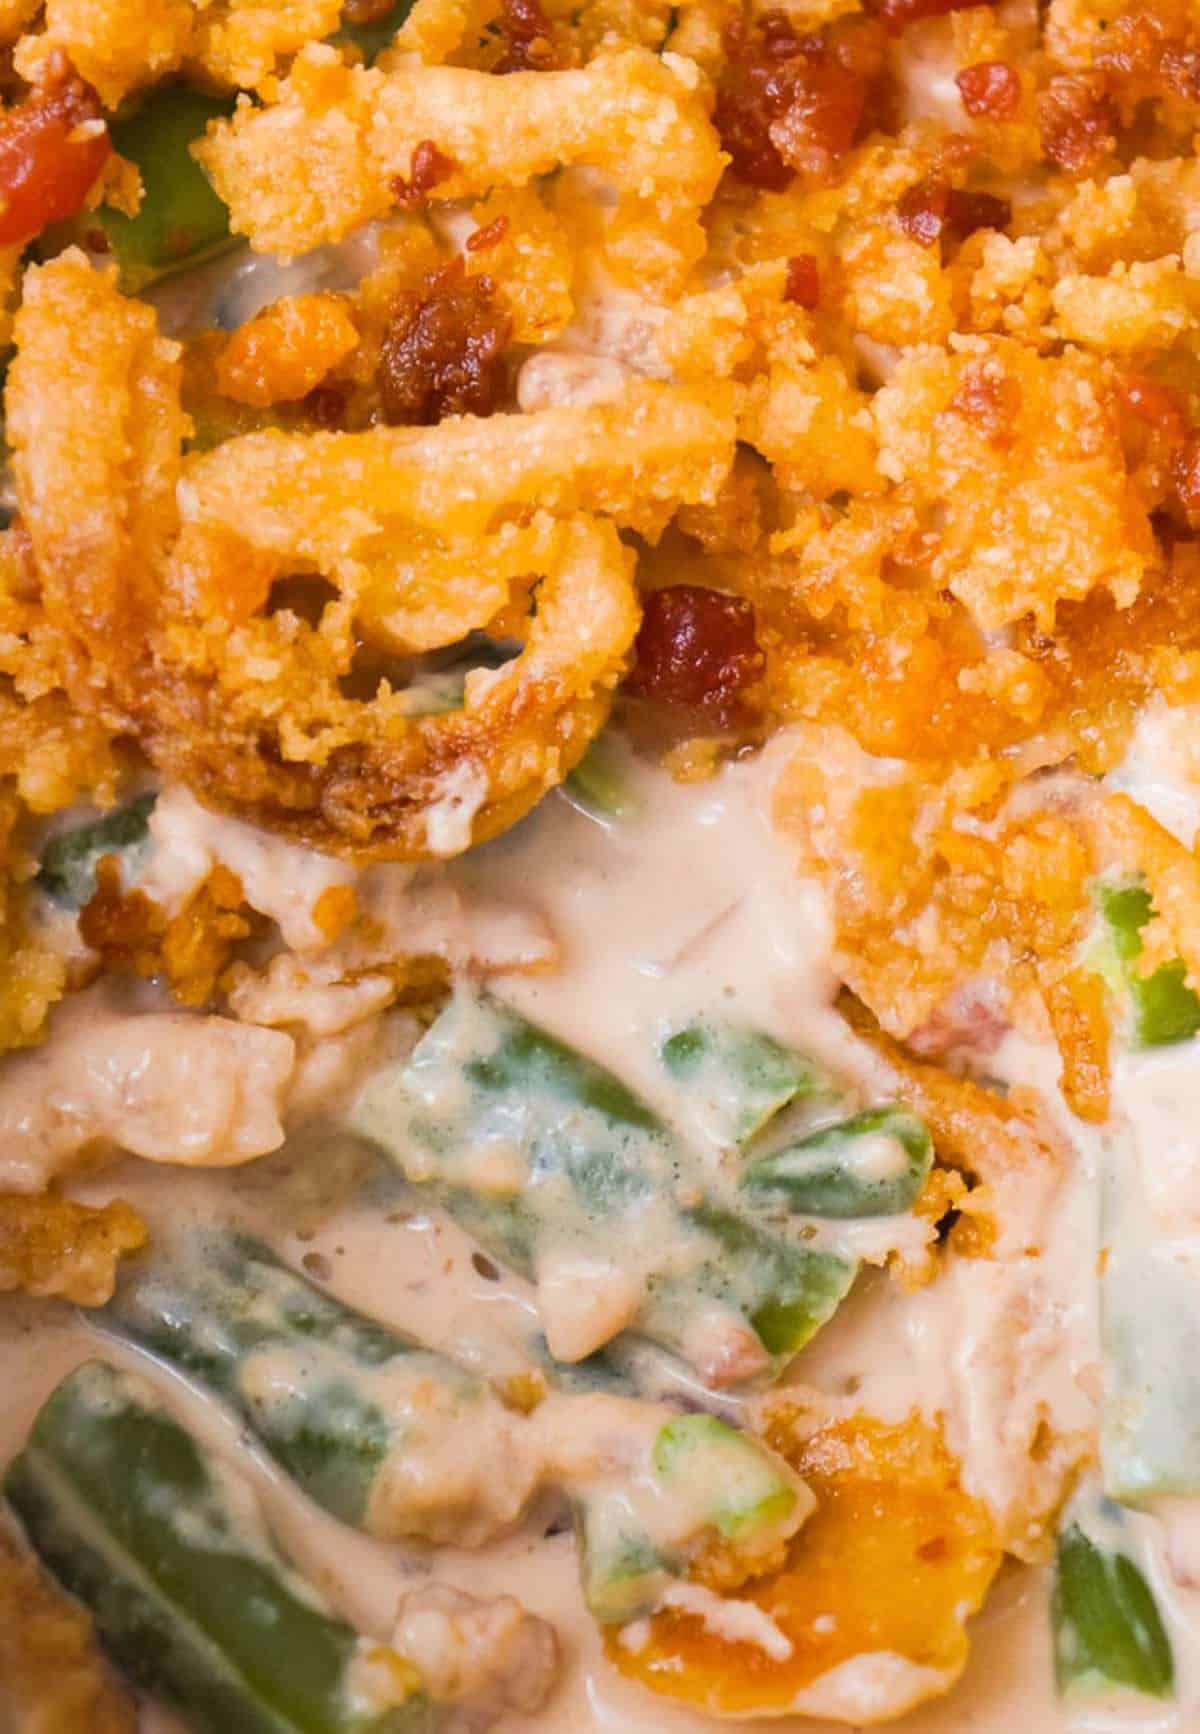 Cream Cheese and Bacon Green Bean Casserole is a holiday side dish recipe made with Lipton onion soup mix and topped with Ritz cracker crumbs, French's fried onions and crumbled bacon.